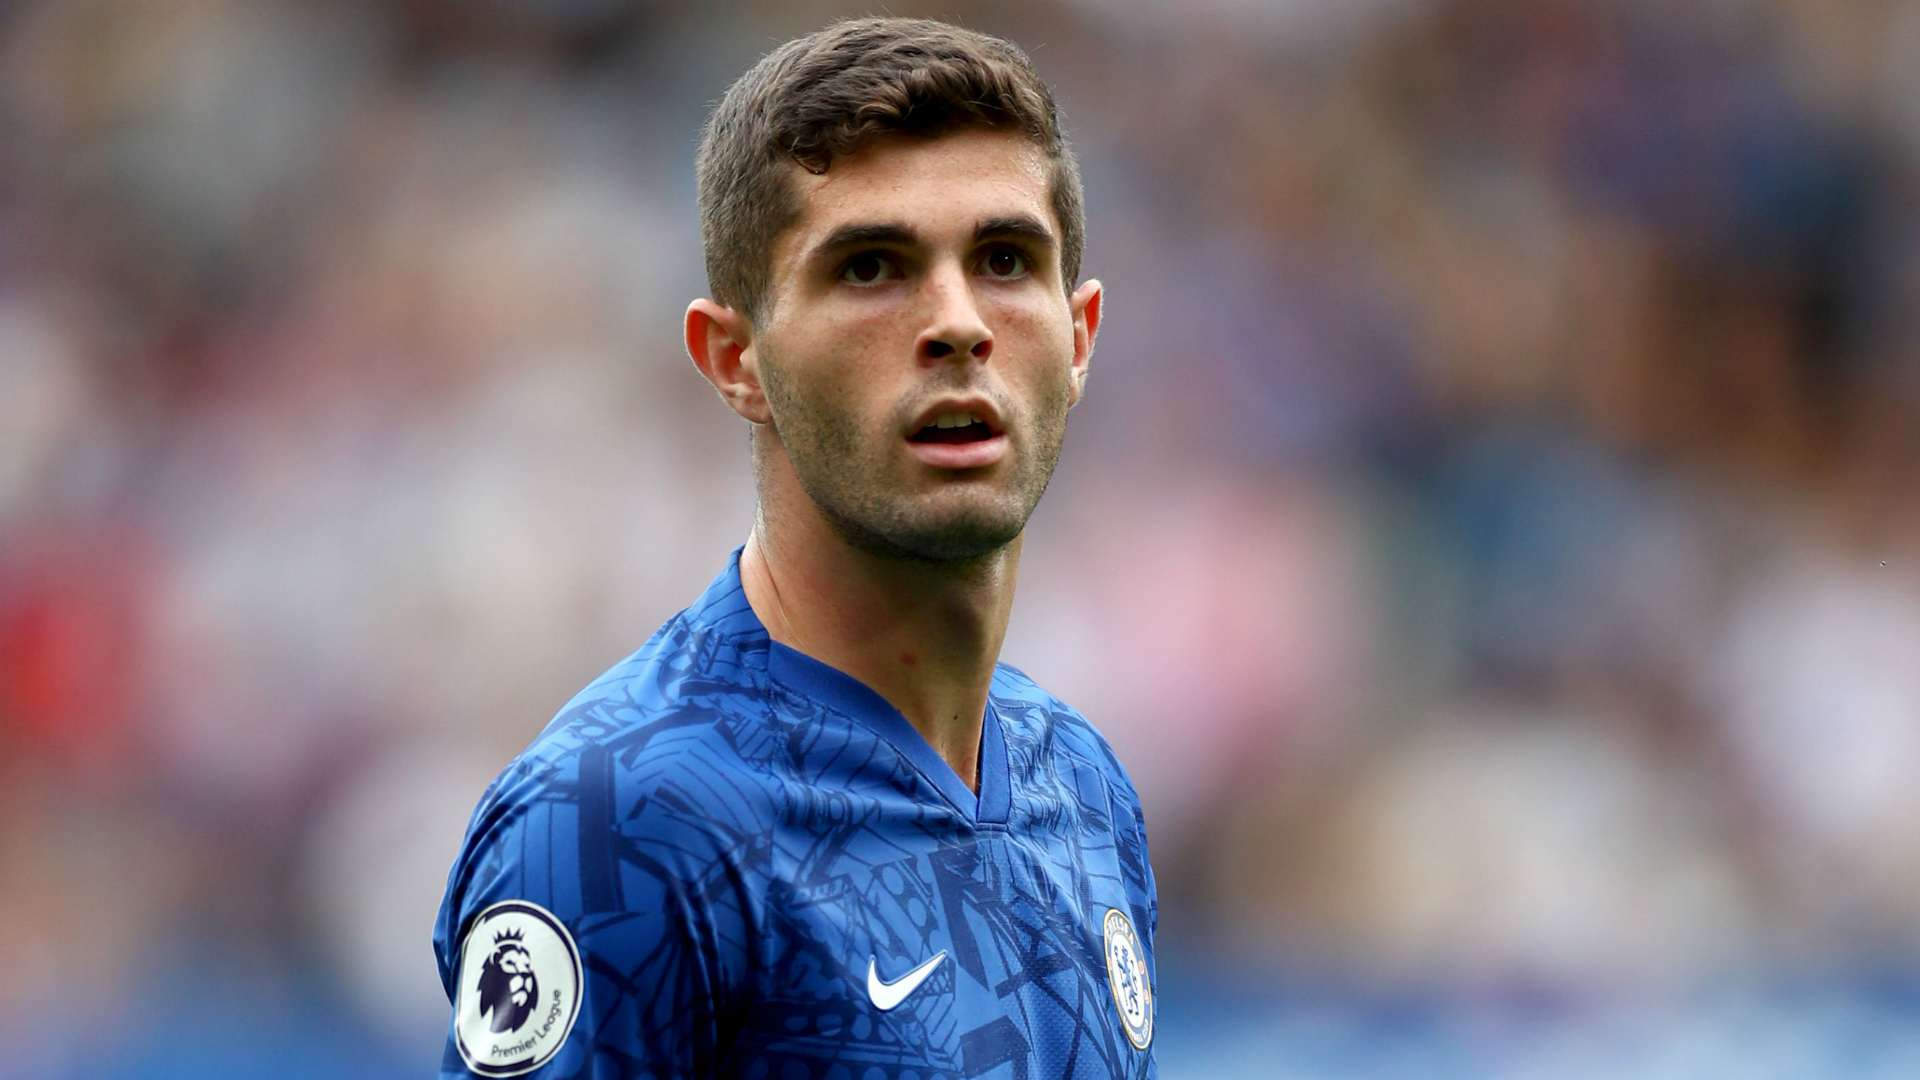 Chelsea's Christian Pulisic frustrated with lack of playing time at